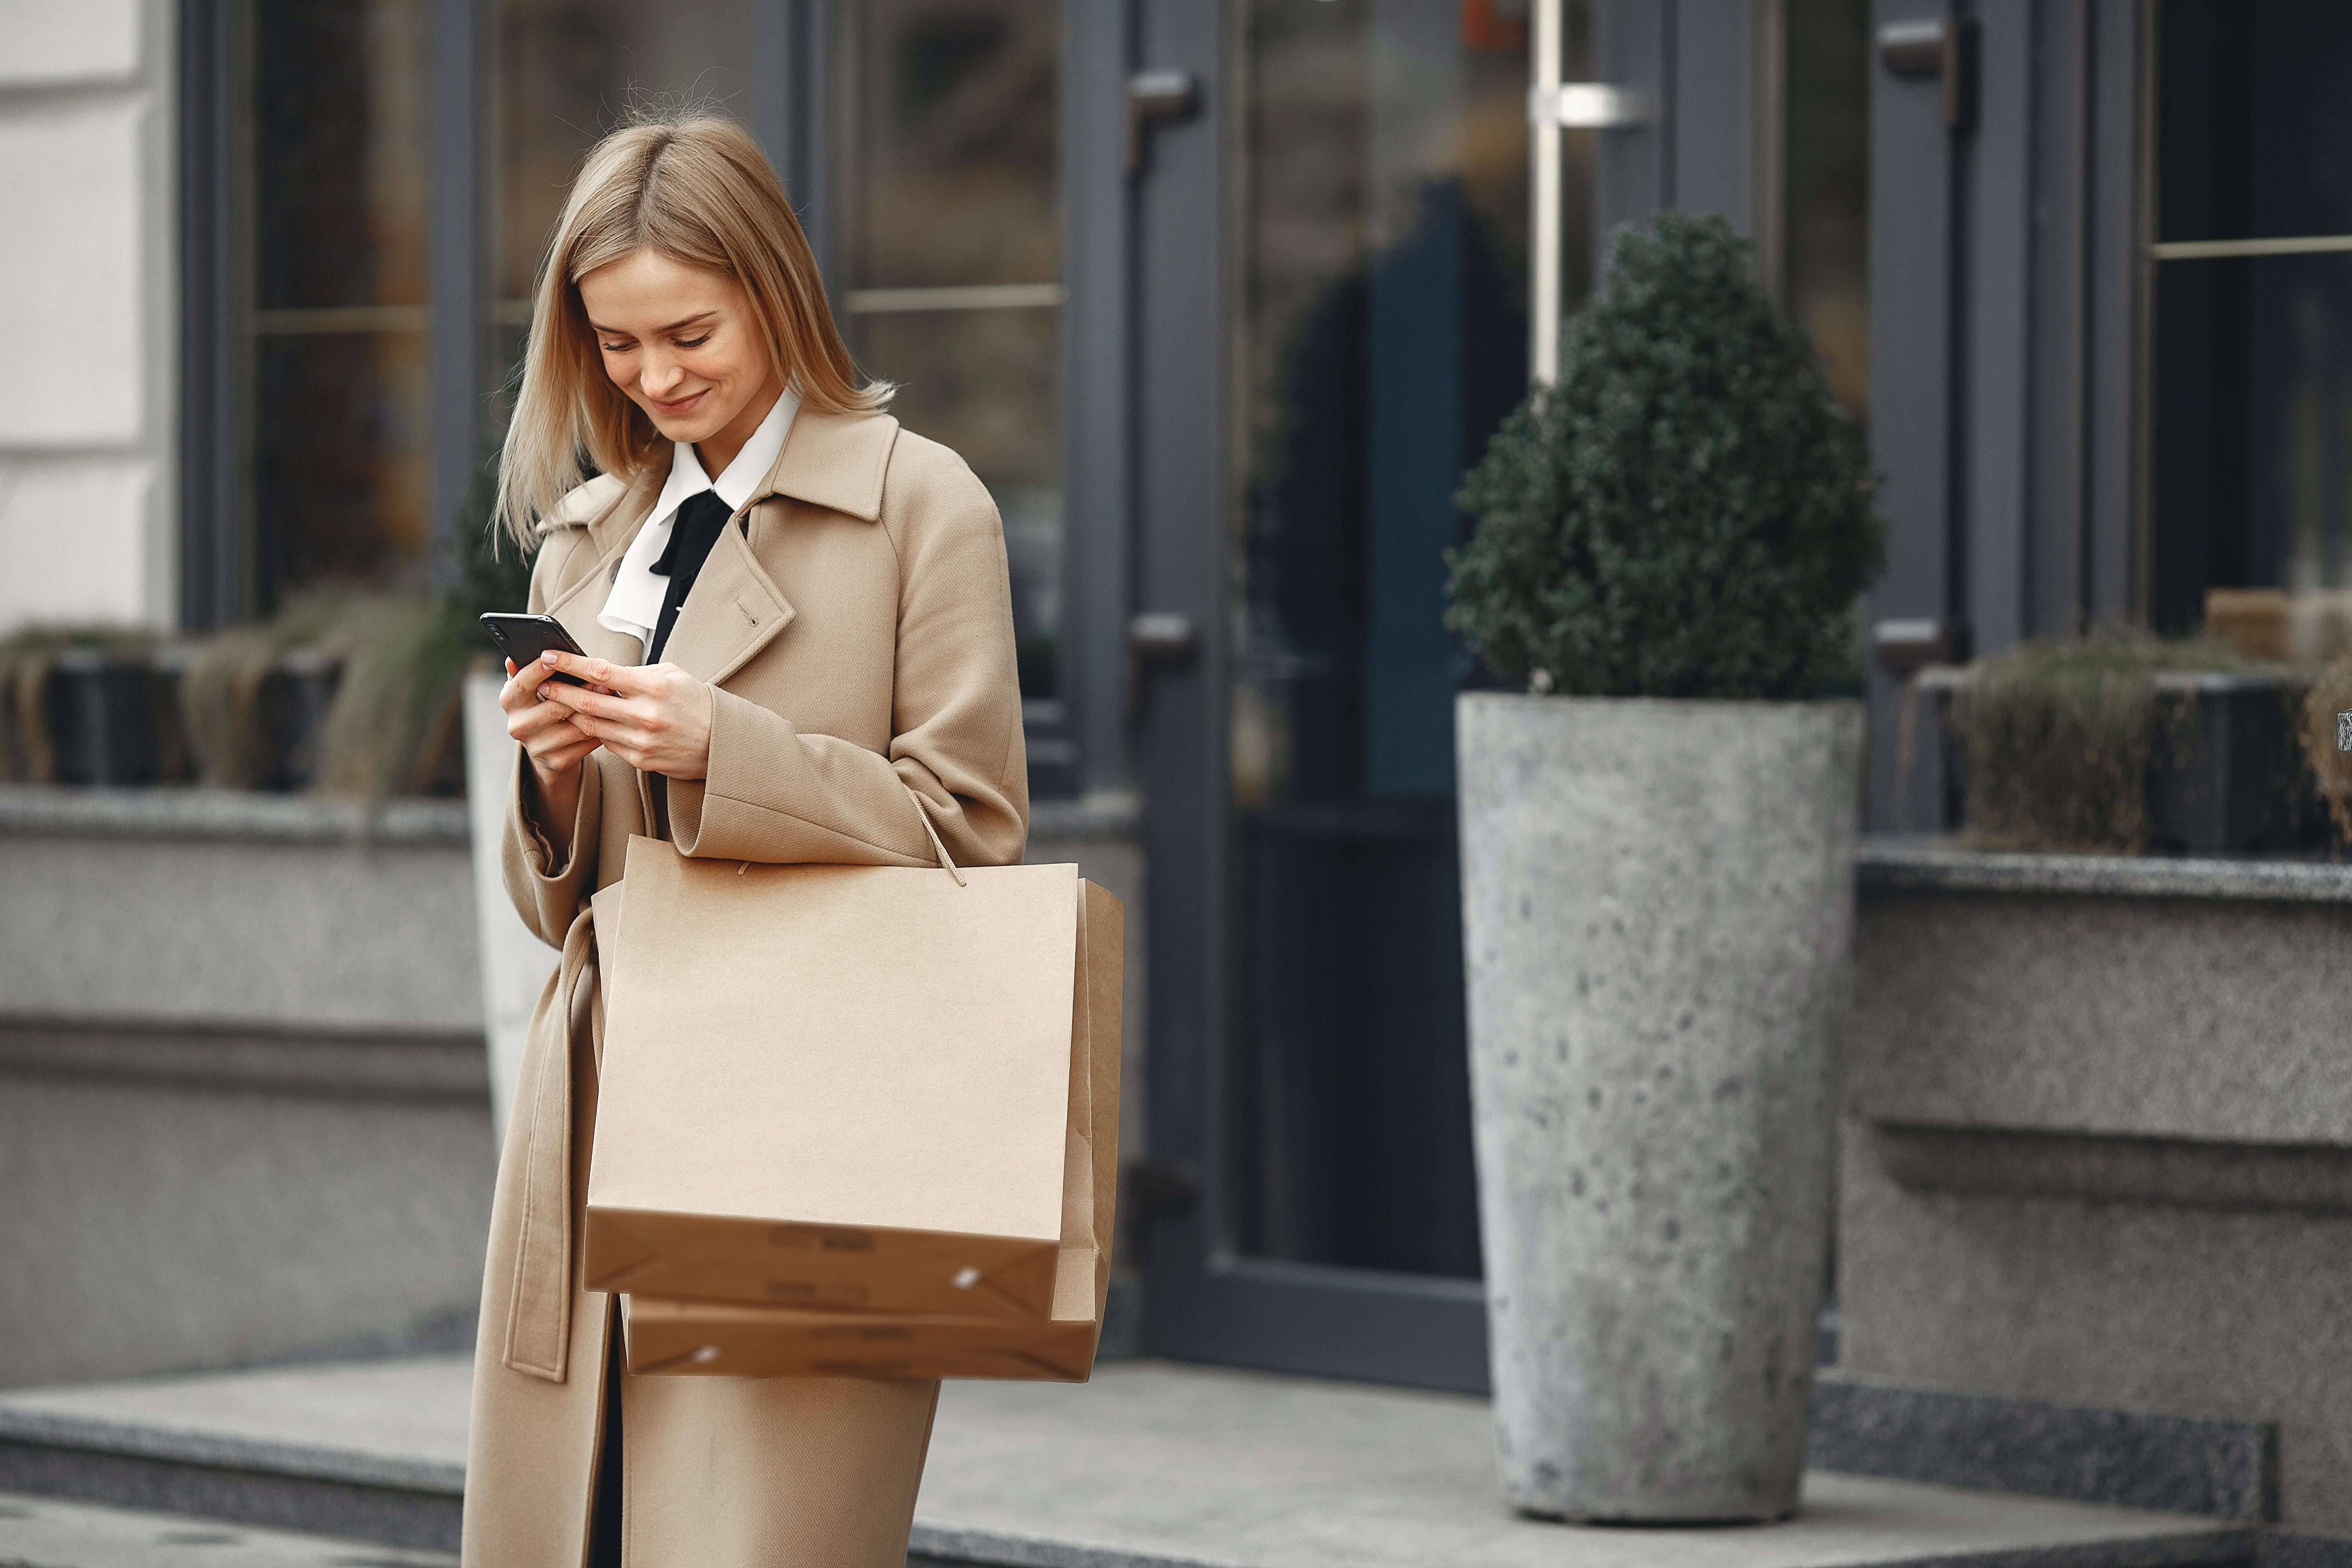 woman with paper bags standing on sidewalk and typing on cell phone